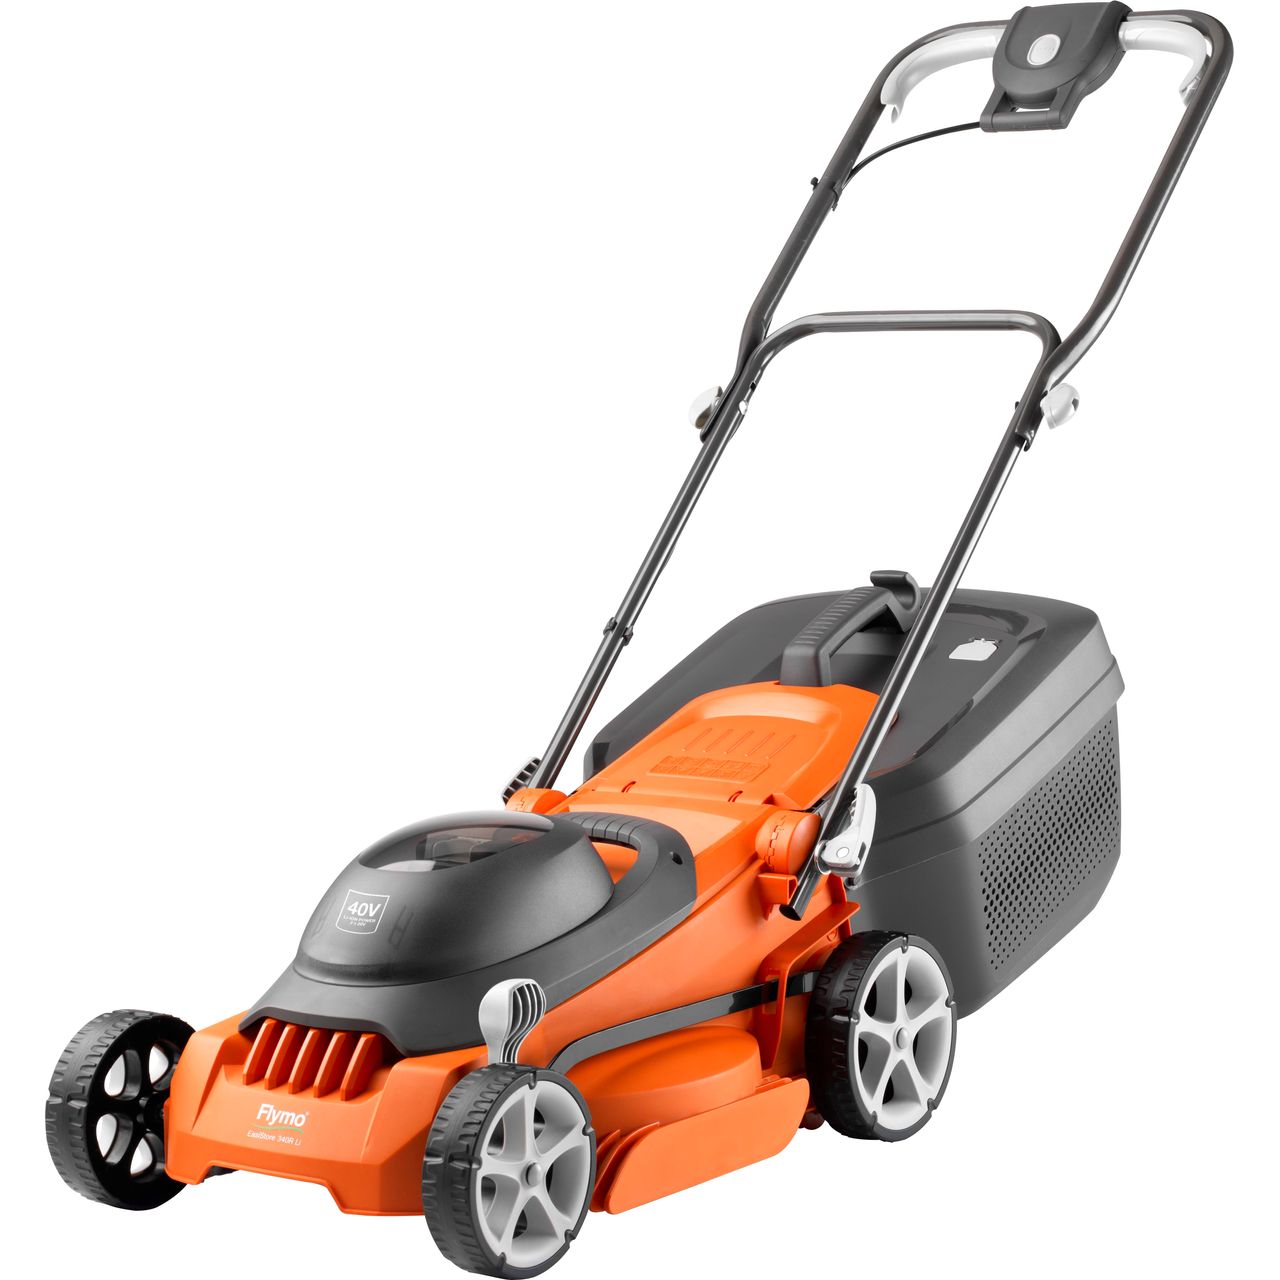 Flymo EasiStore 340R 40 Volts Electric Lawnmower Review